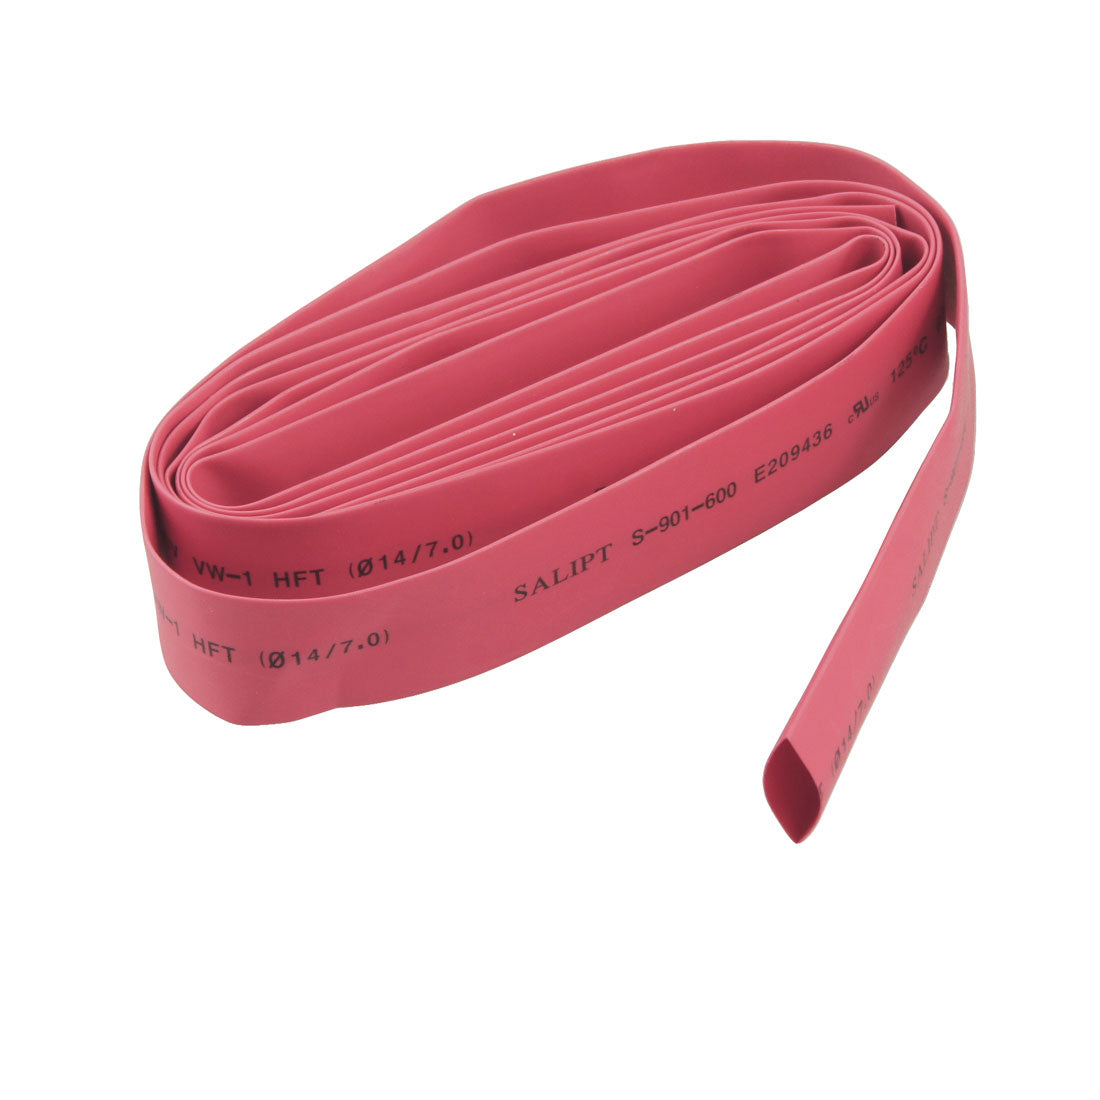 uxcell Uxcell 2M 6.5ft 14mm Dia Heat Shrinkable Tube Shrink Tubing Red